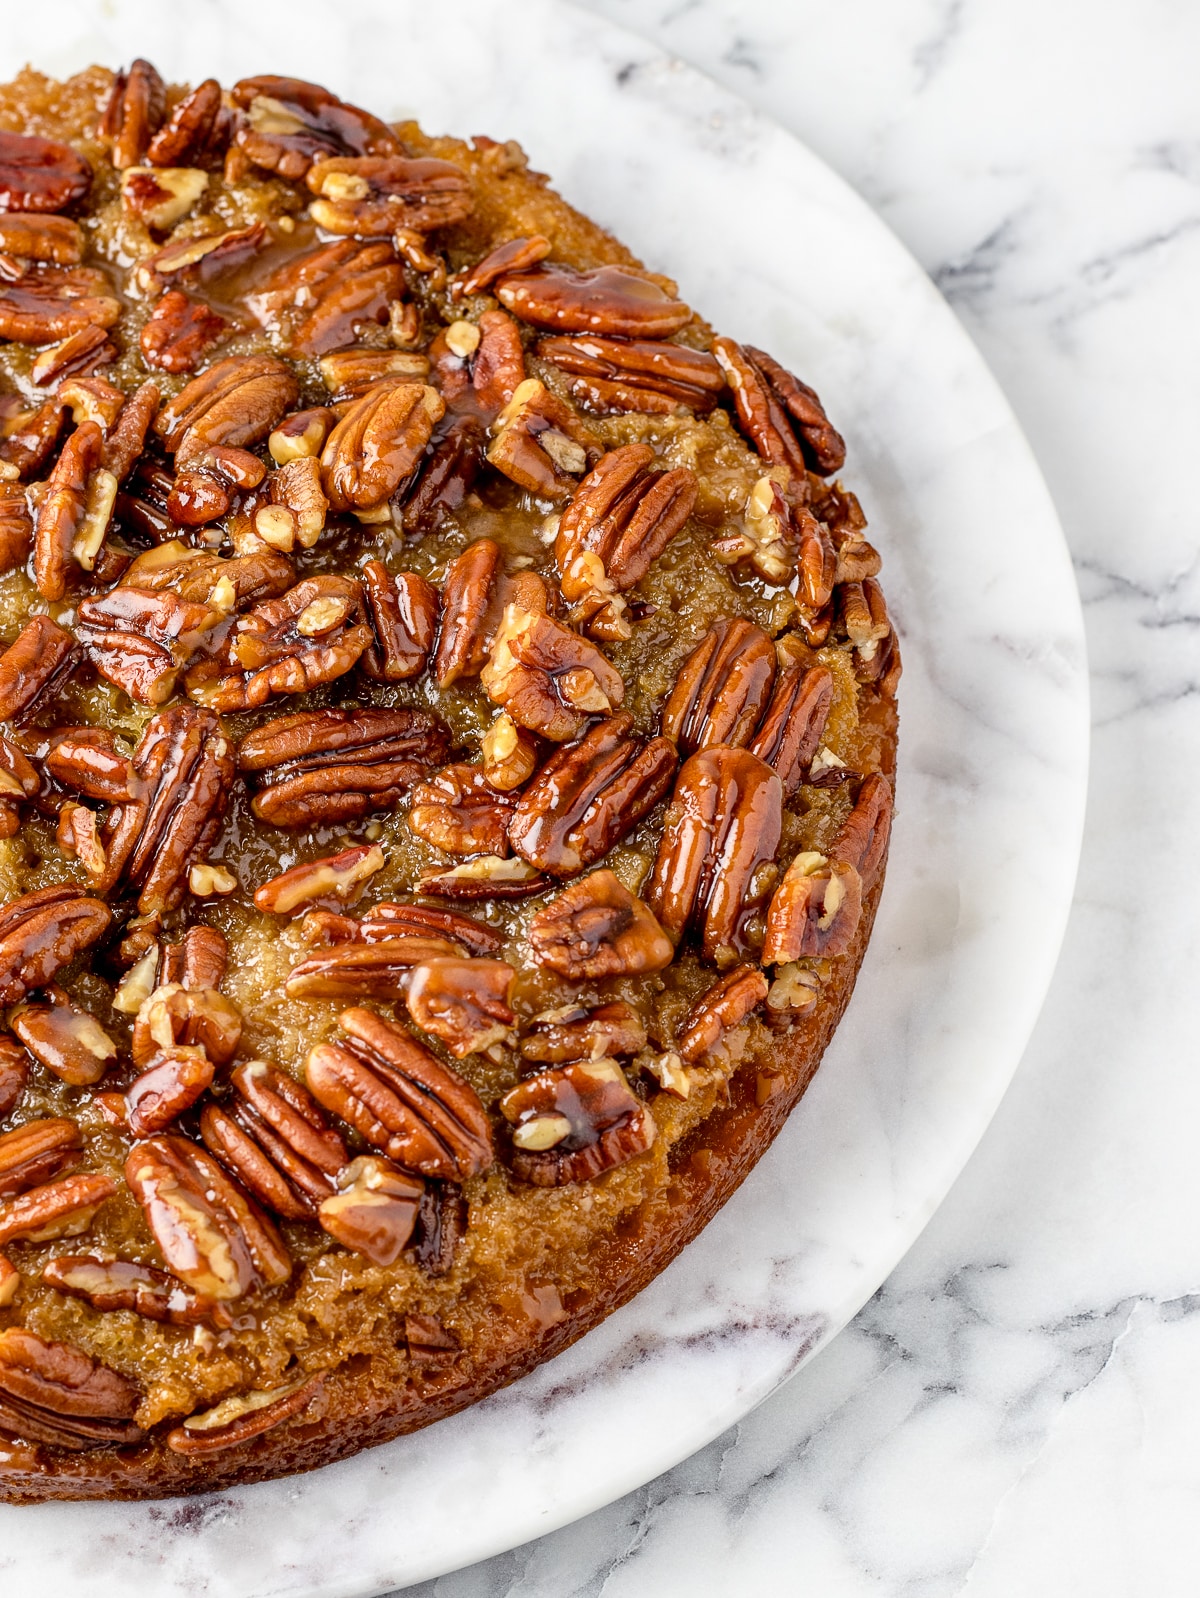 A whole Pecan Upside Down Cake, zoomed in on the pecans, and gooey caramel top.